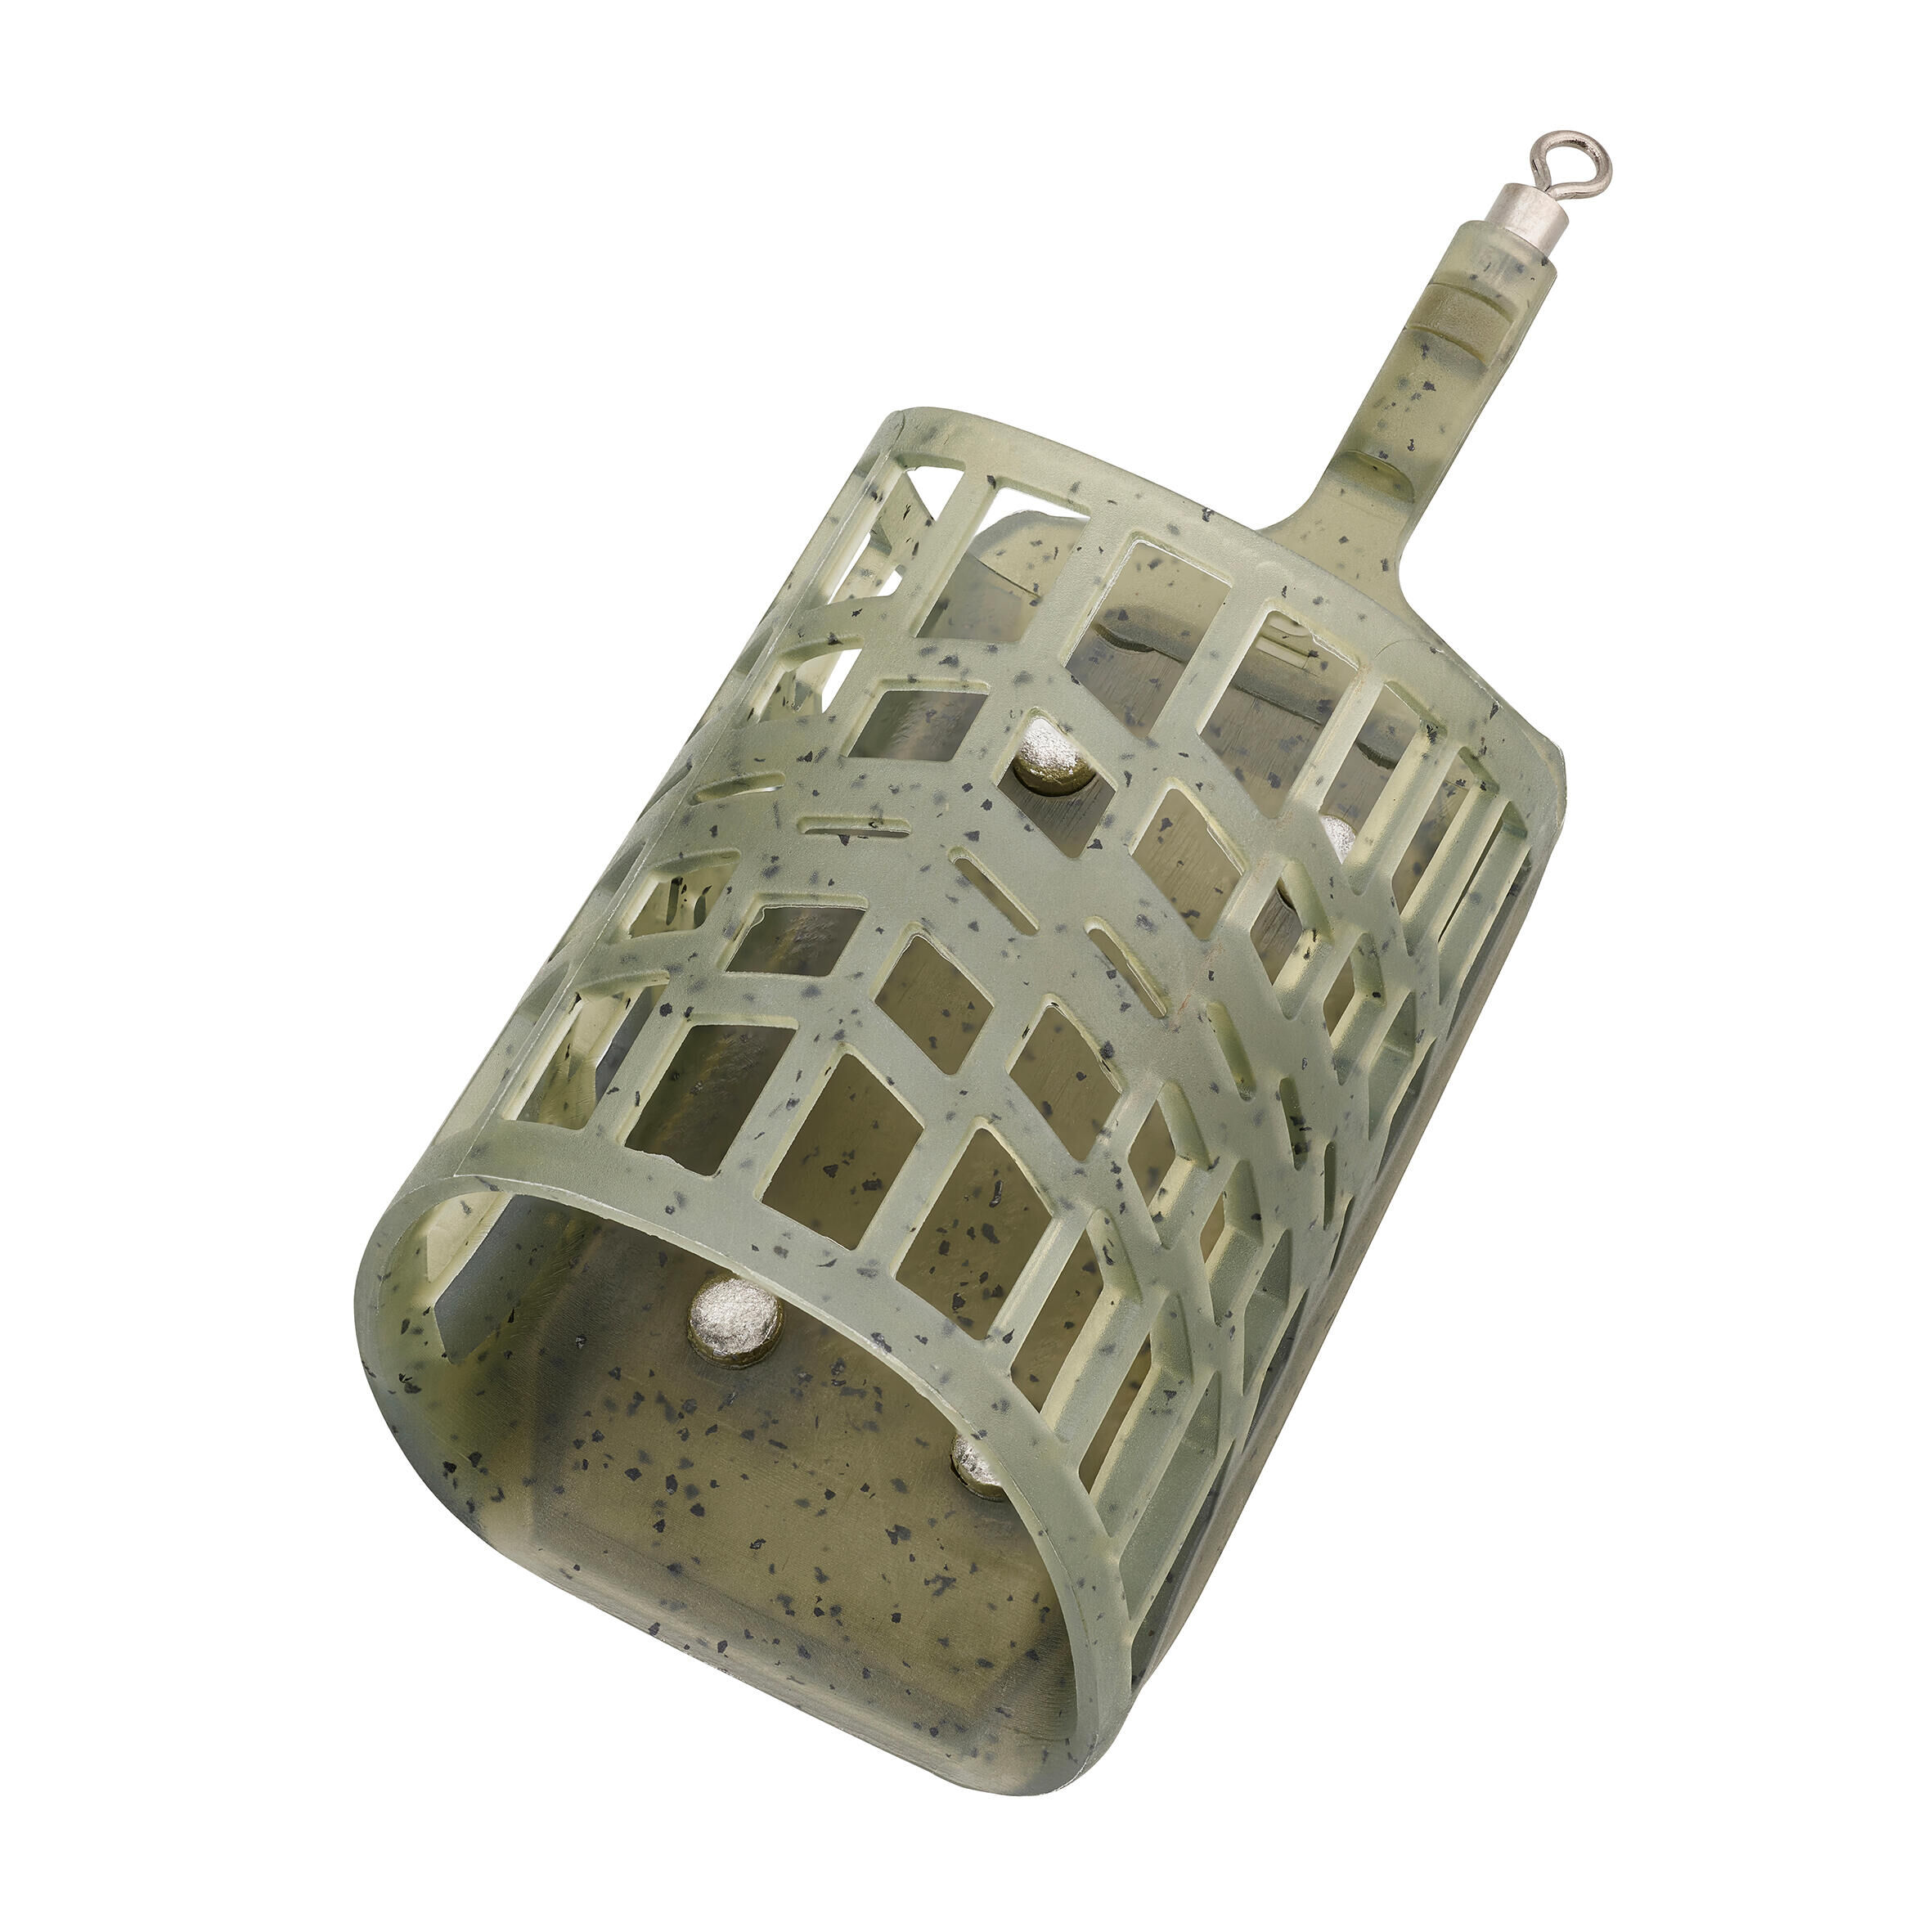 CAPERLAN Size large open cage feeder for feeder fishing, FEEDER - SO - L.